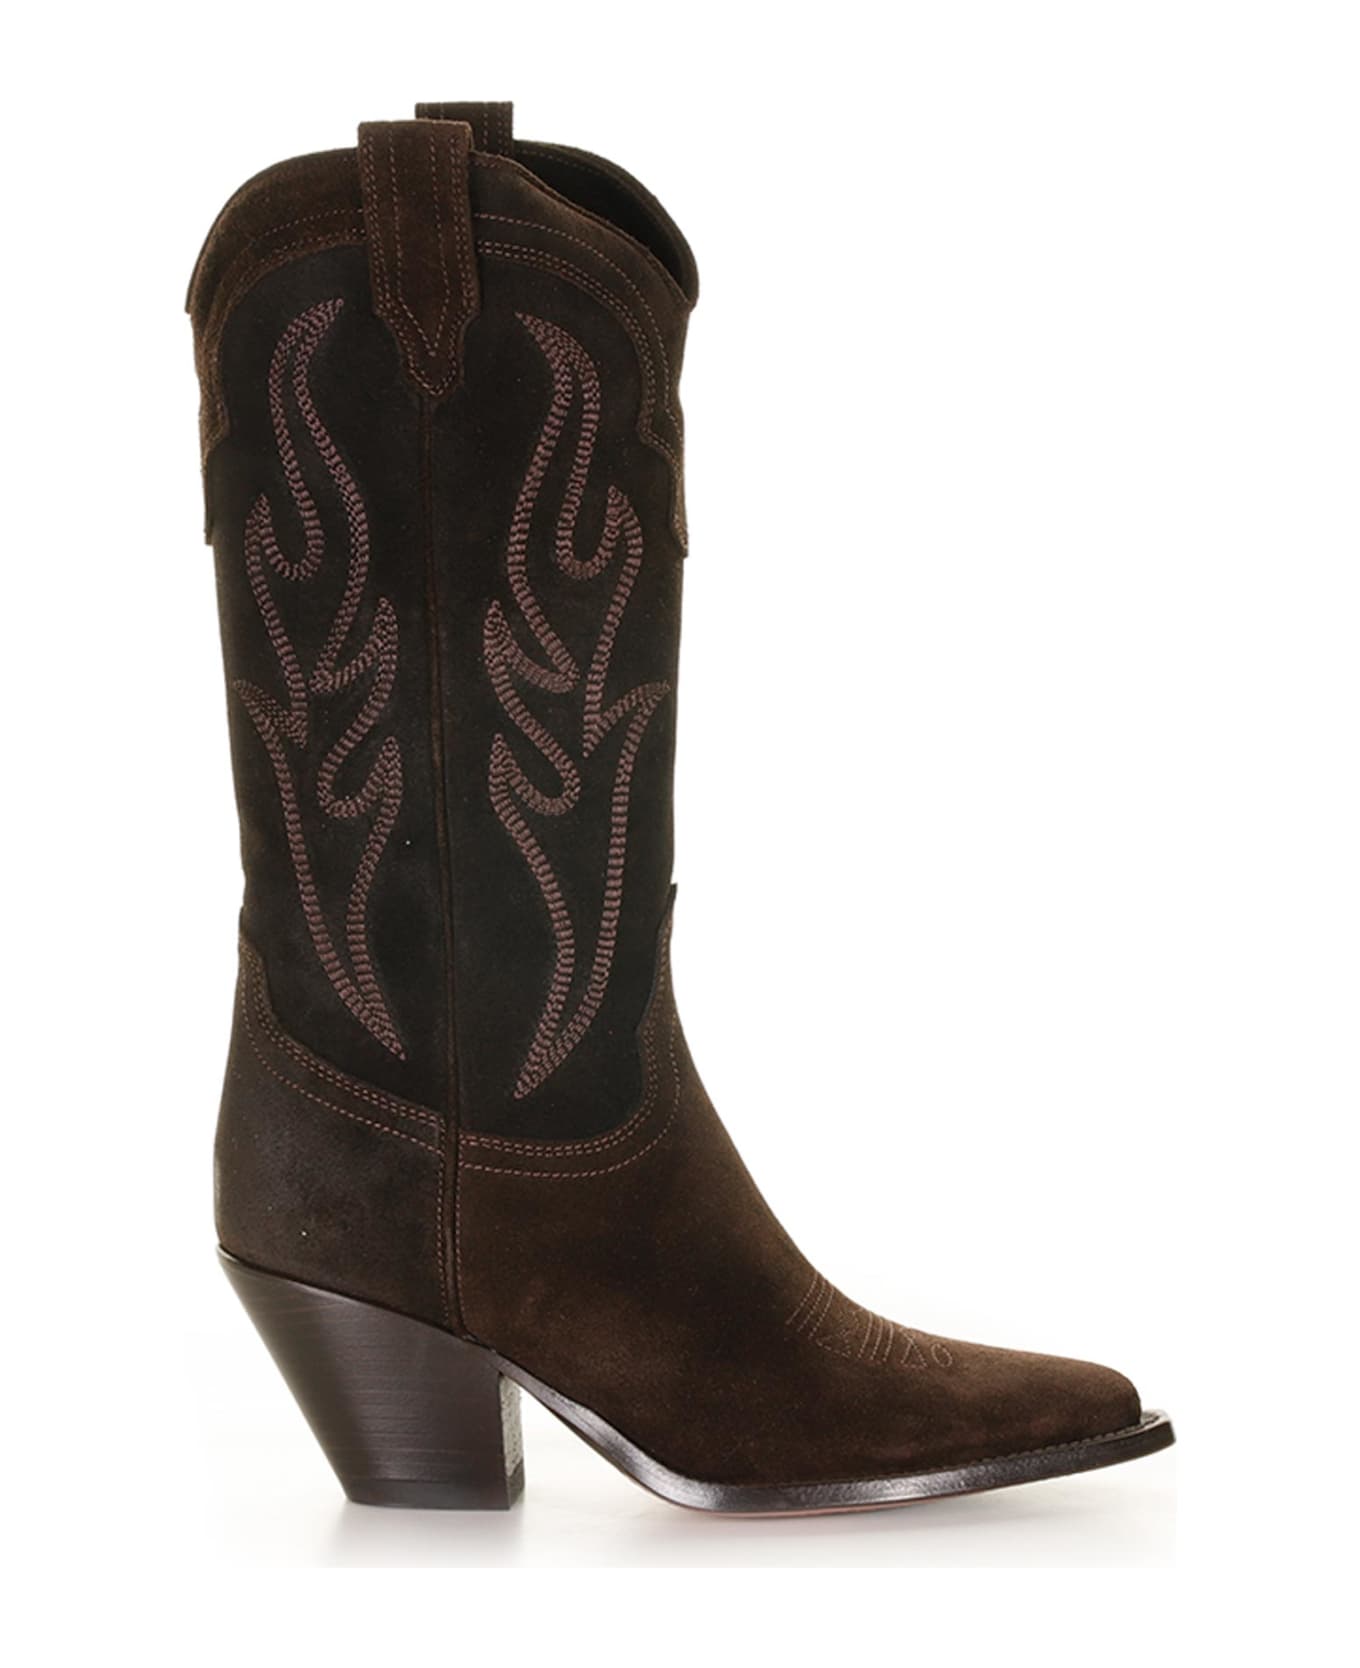 Sonora Santa Fe Cowboy Style Texan Boot In Embroidered Suede - BROWN